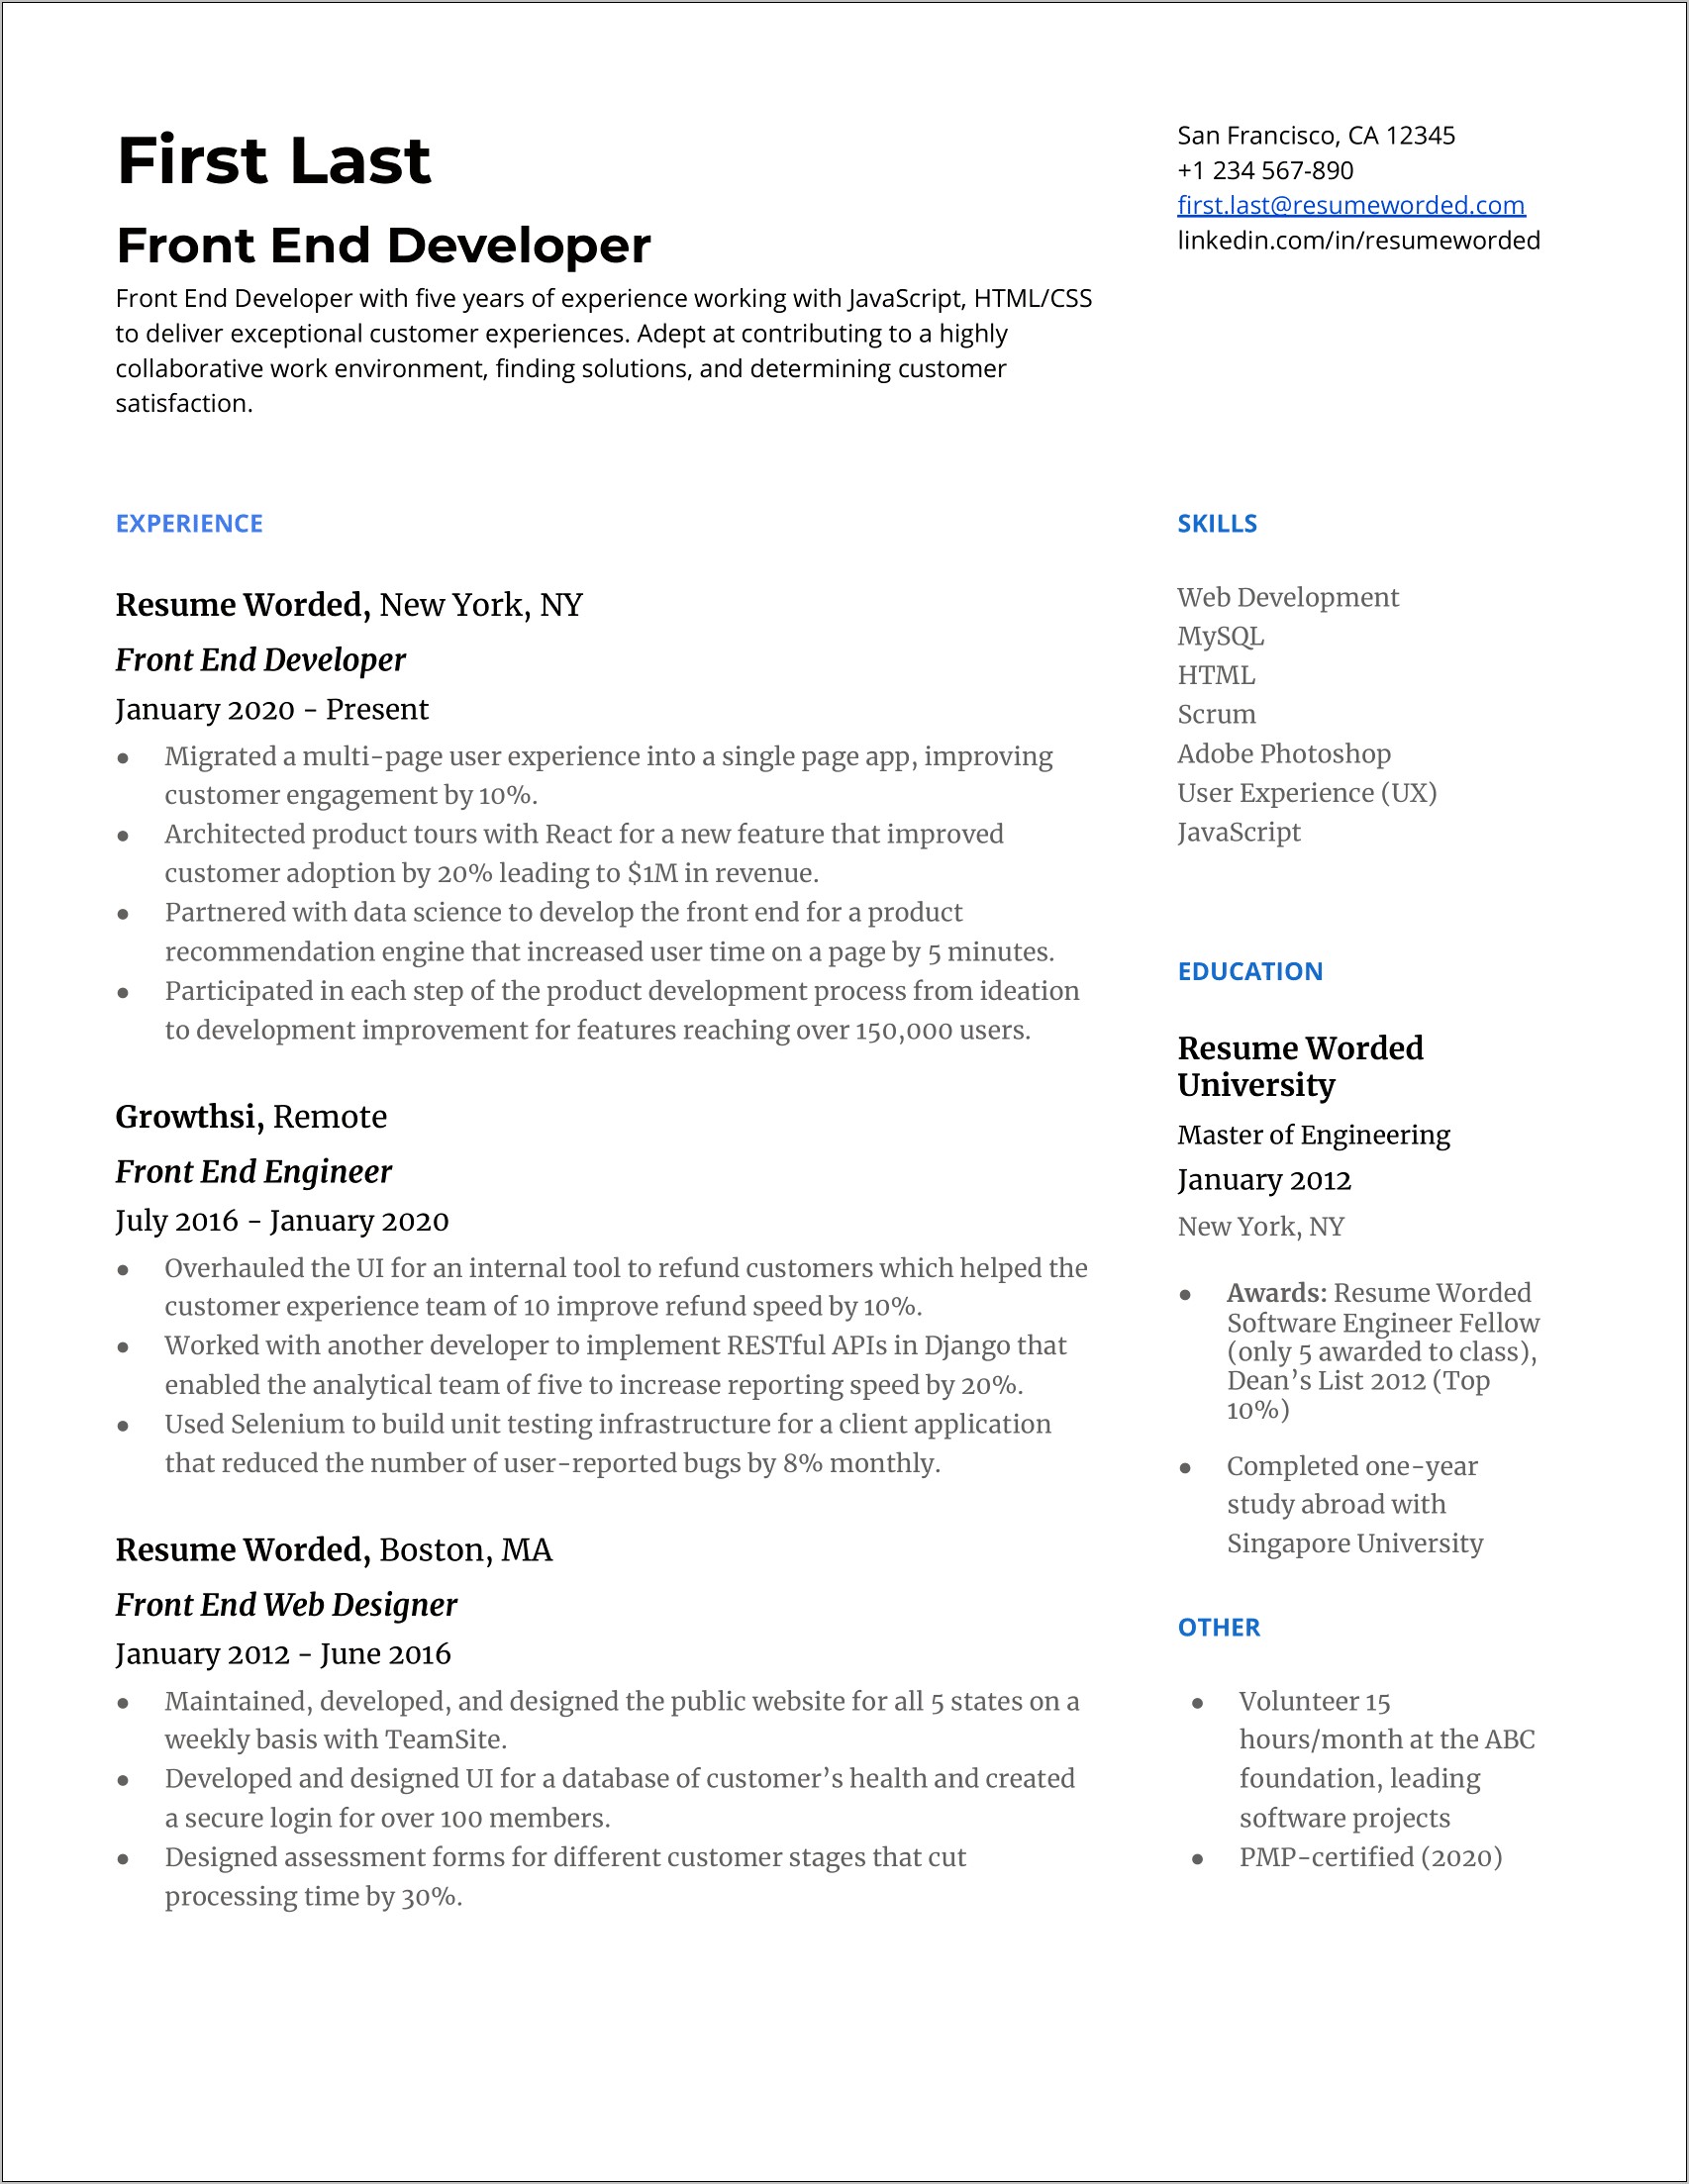 Does Private Experience Count For Developer Resumes